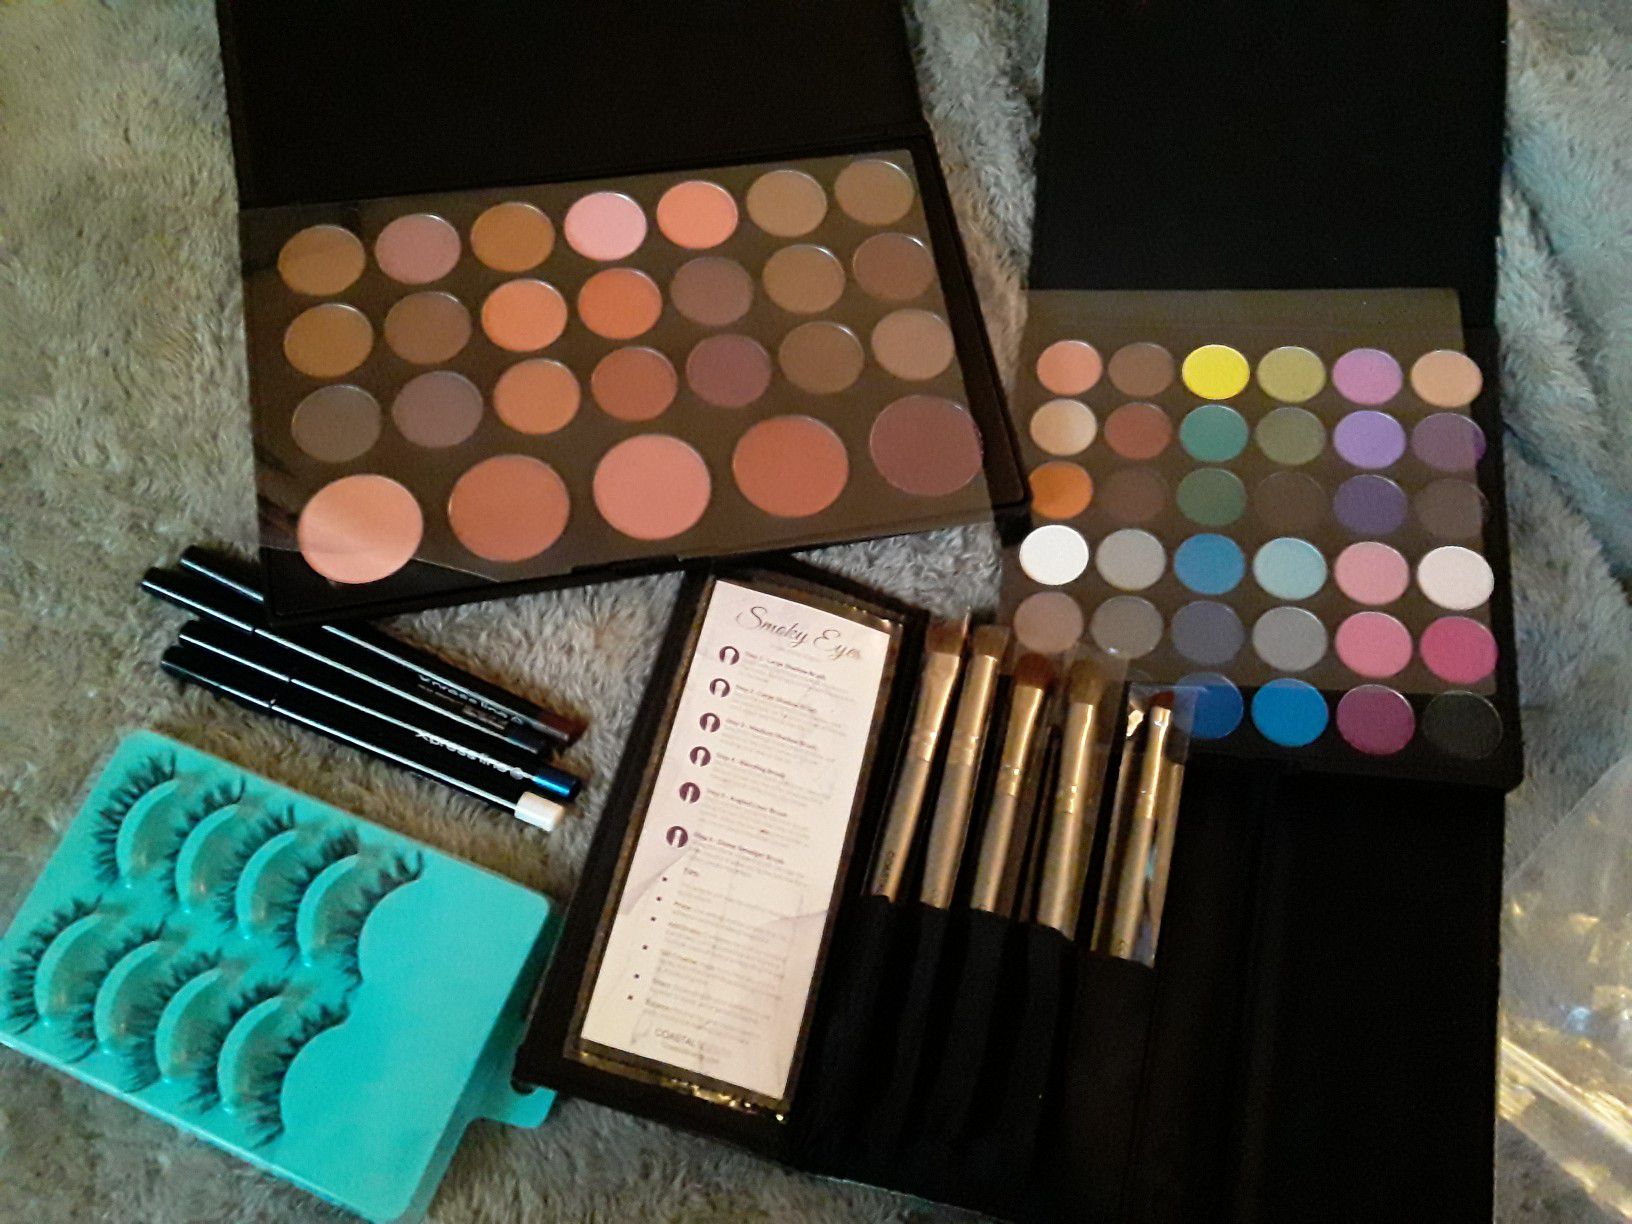 Beauty and health makeup,brushes and eyelashes lot